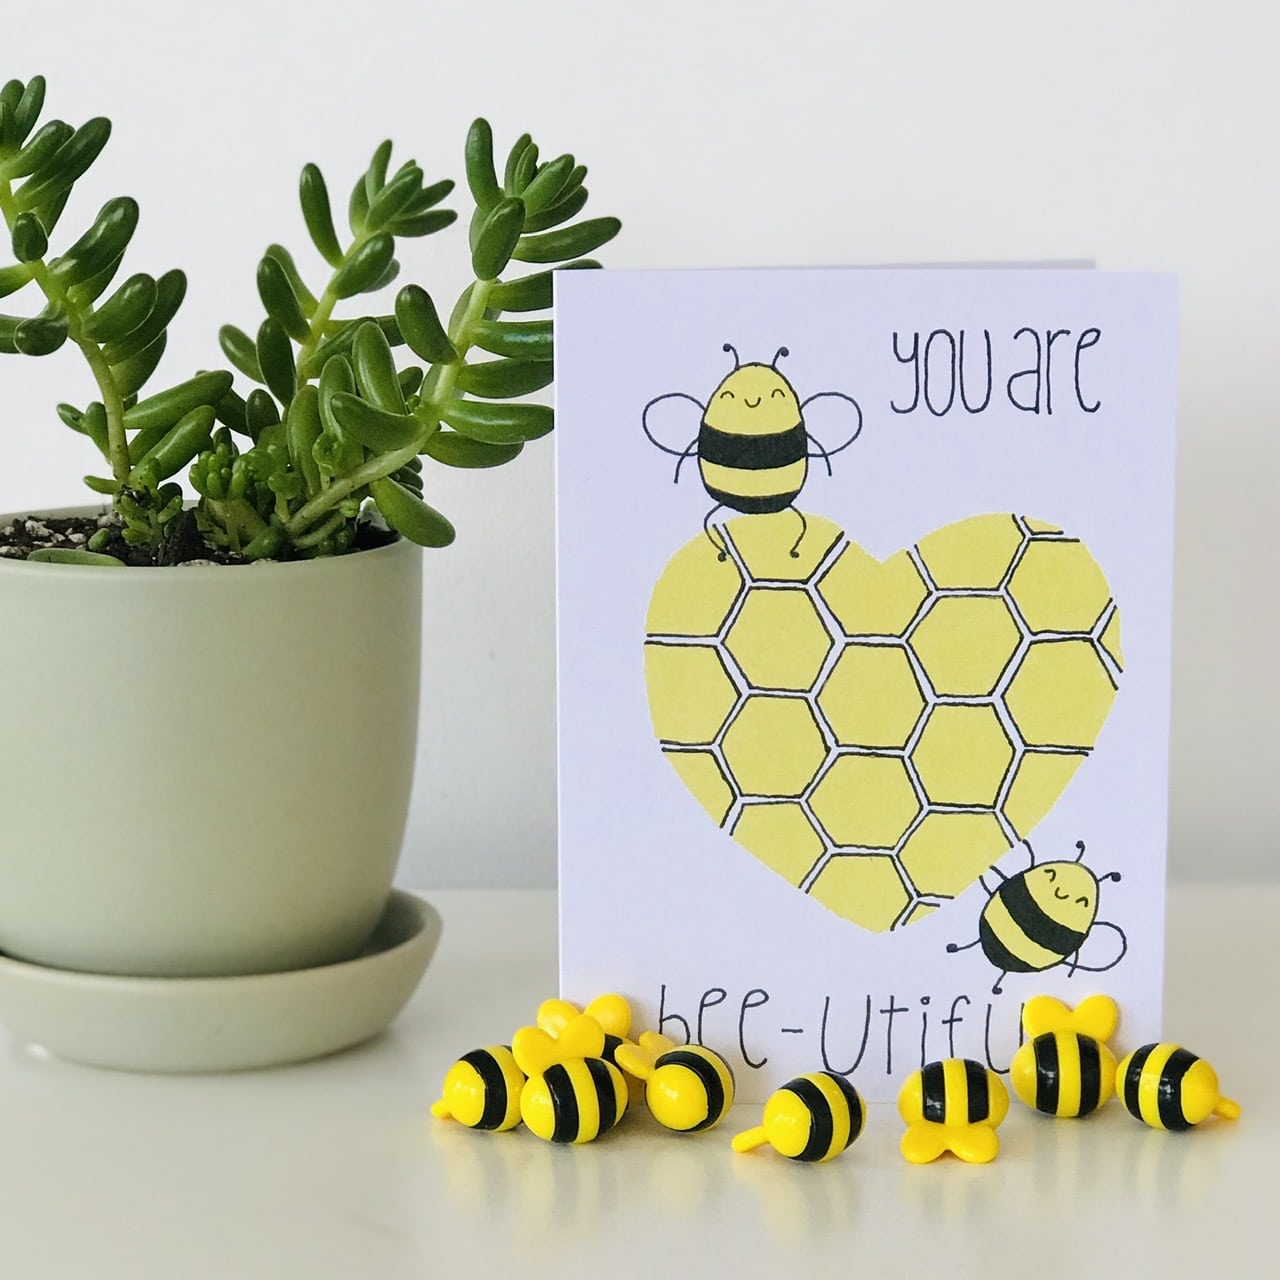 A You Are Bee-utiful Card from Sweet Pea Creations, boasting a hand made print with the pun "you are bee-utiful," stands next to a potted green succulent, accompanied by small bee figurines arranged playfully.